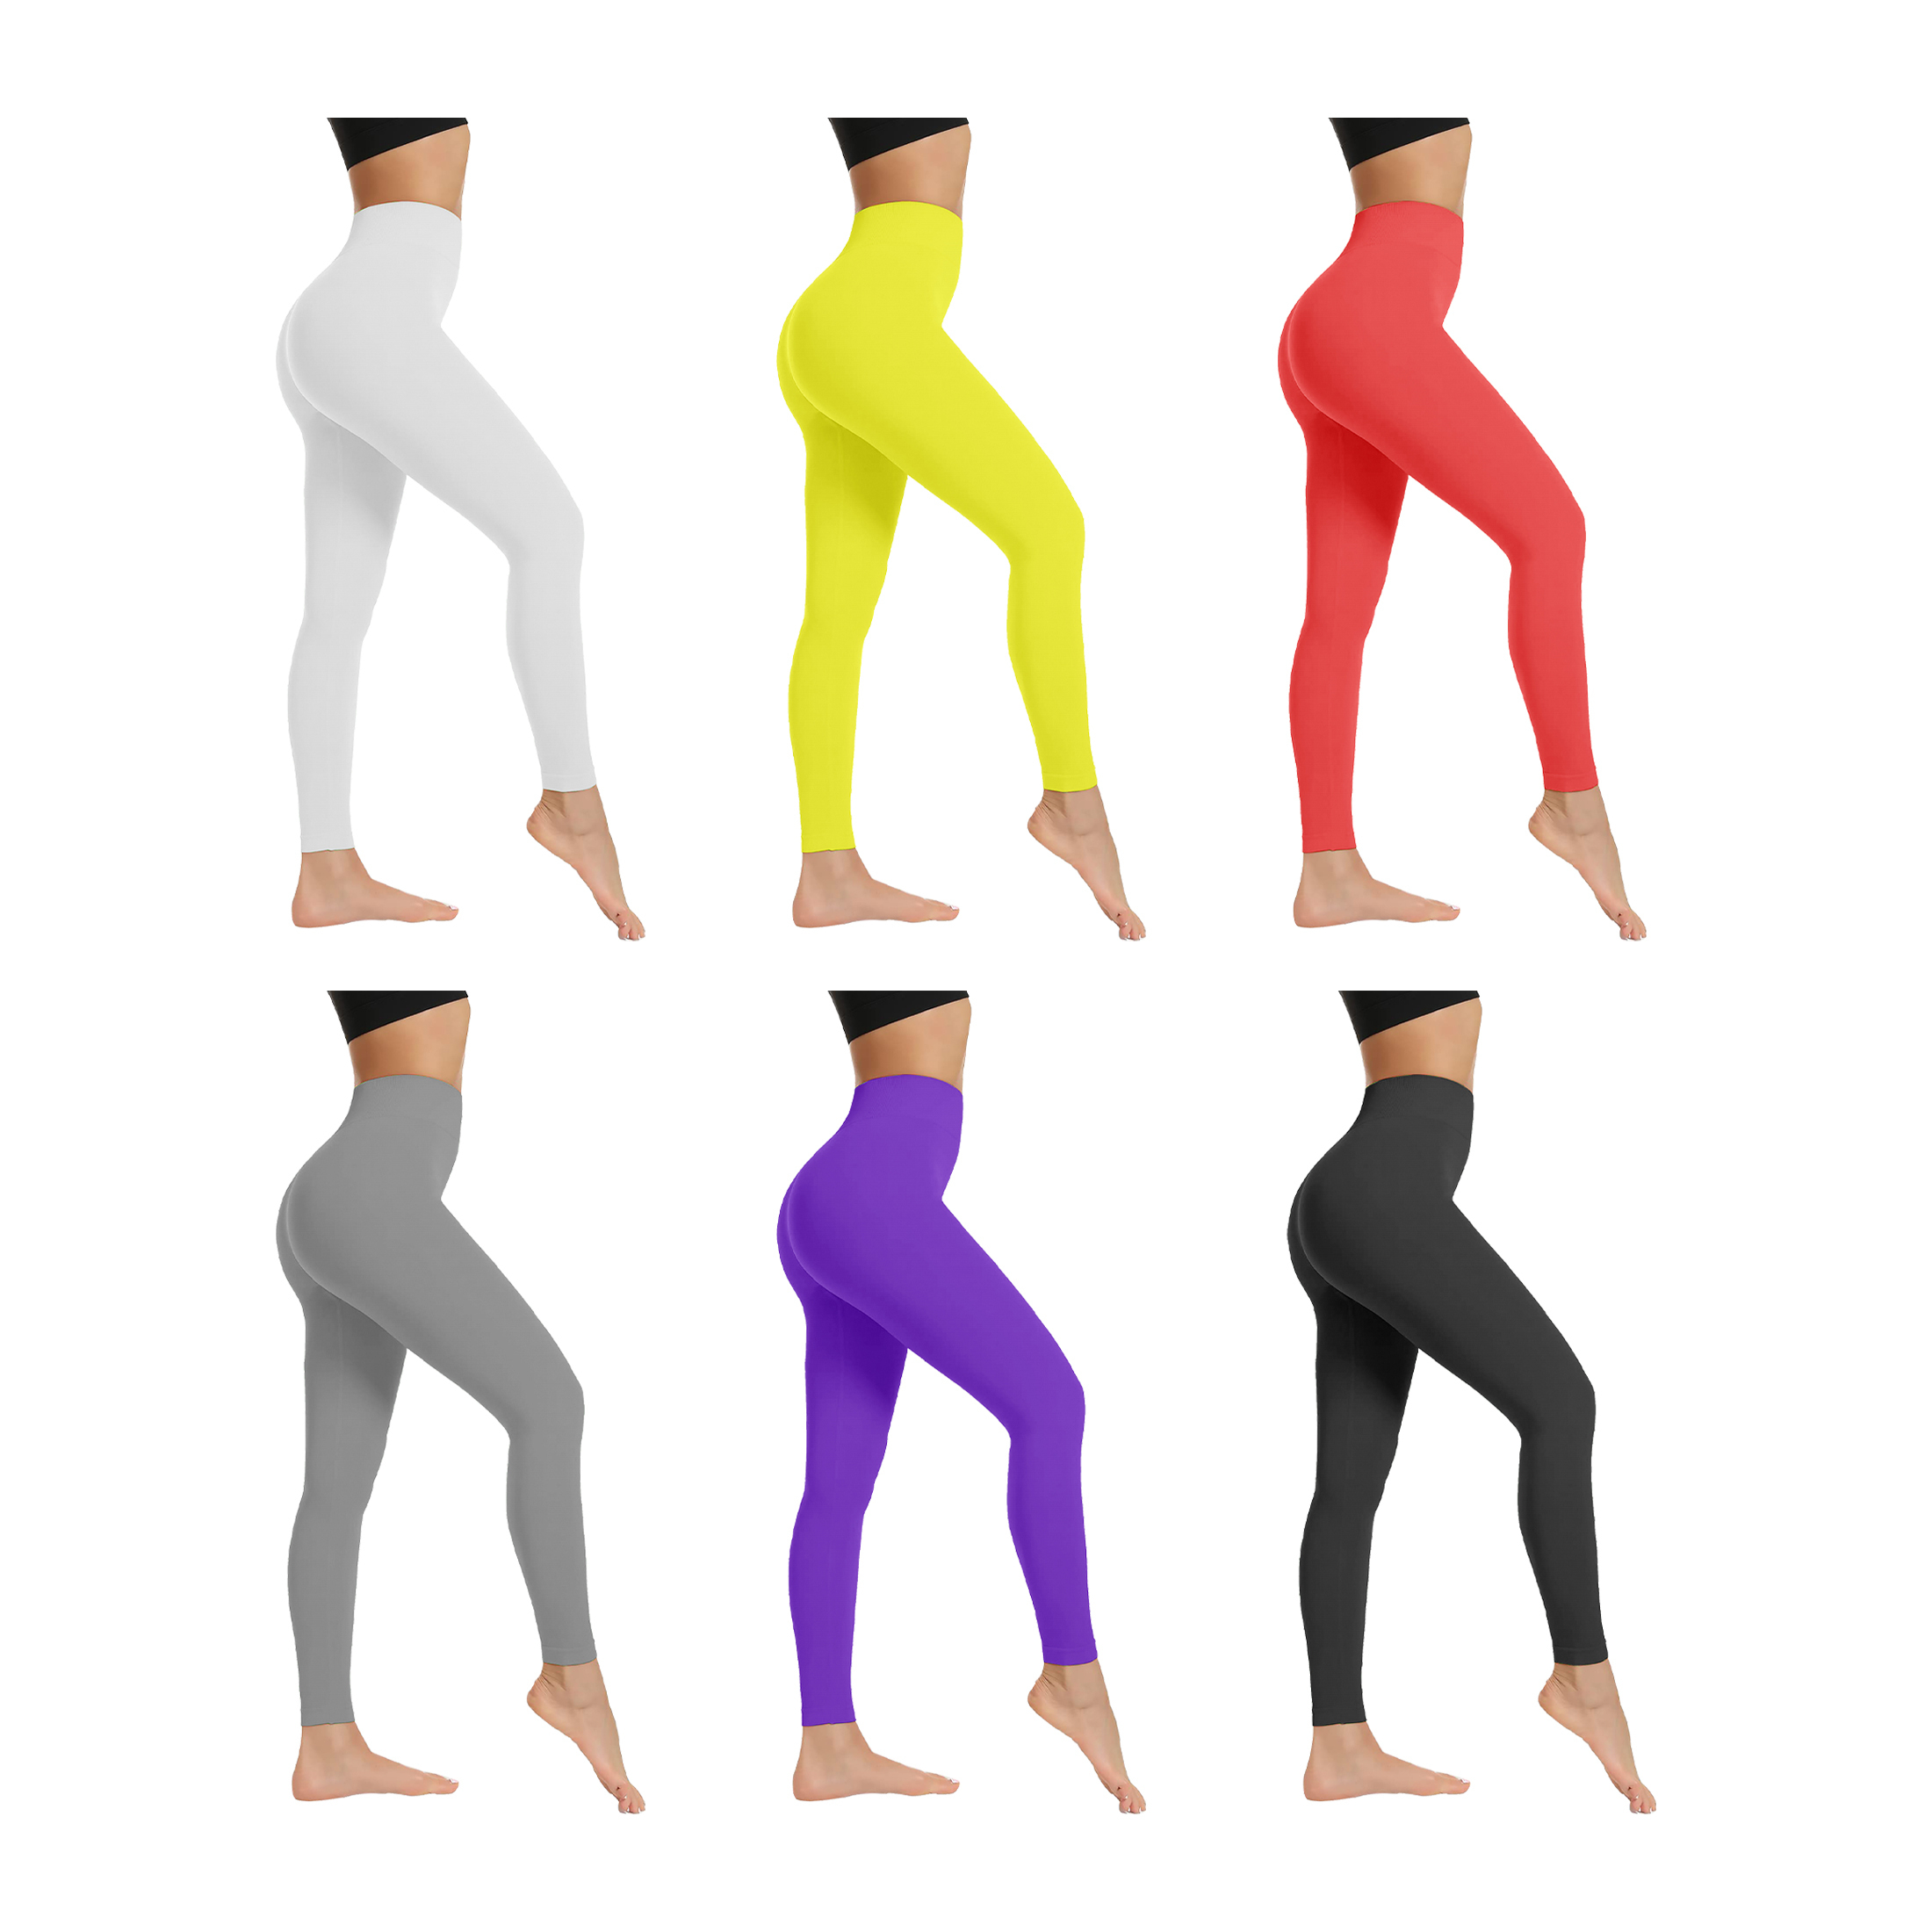 1-Pack: Women's High-Waist Ultra-Soft Stretchy Solid Fitness Yoga Leggings Pants - XS